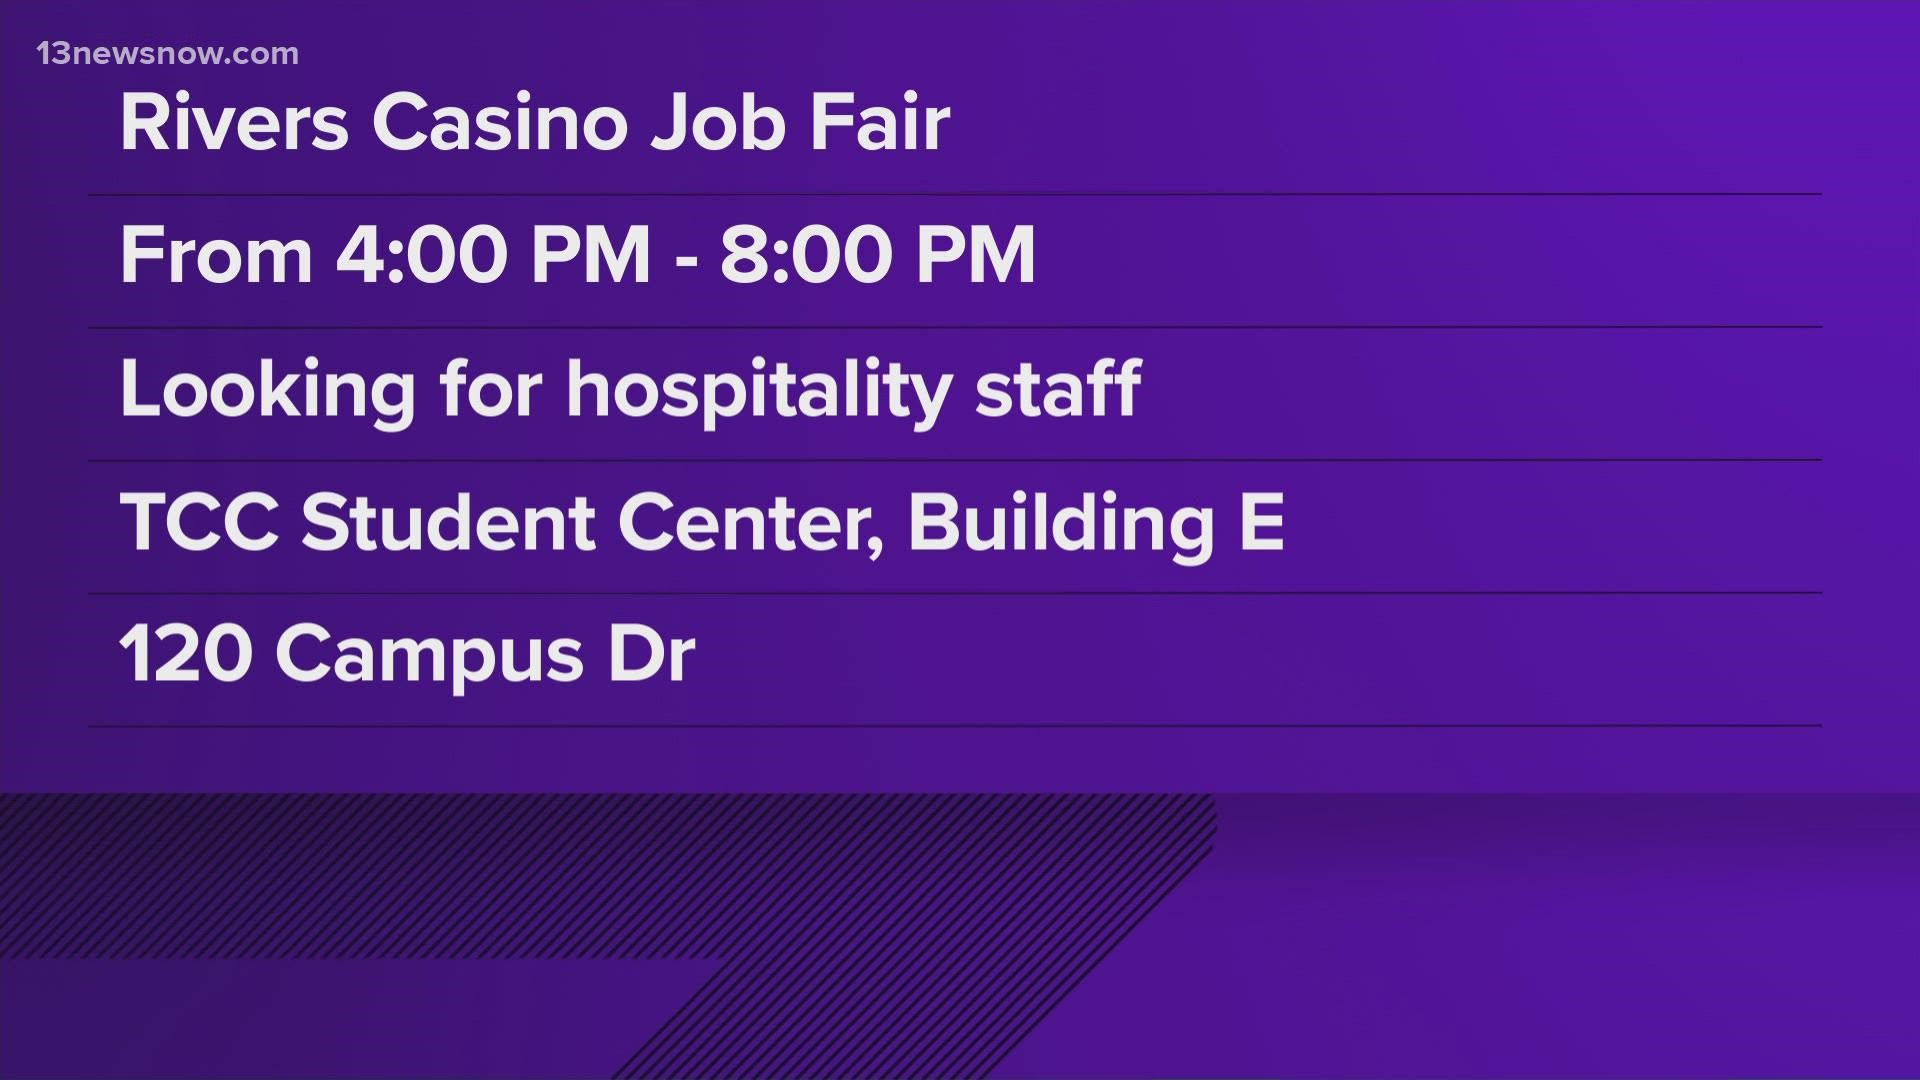 The casino needs to hire food servers, bar tenders, cooks and more. The fair goes until 8 p.m.